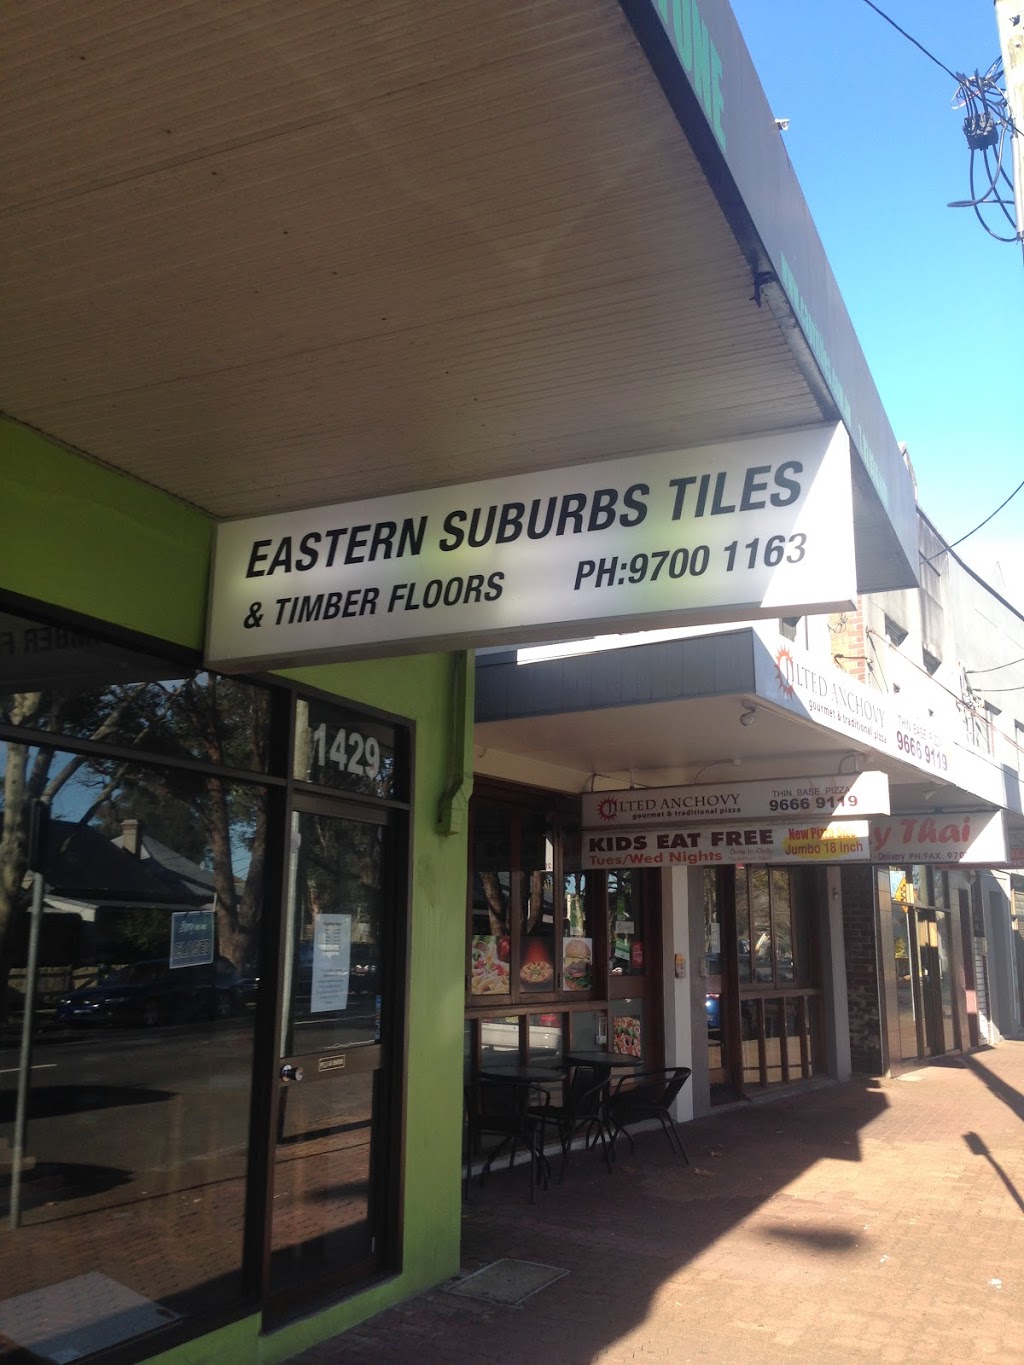 Eastern Suburbs Tiles & Timber Floors (1429 Botany Rd) Opening Hours